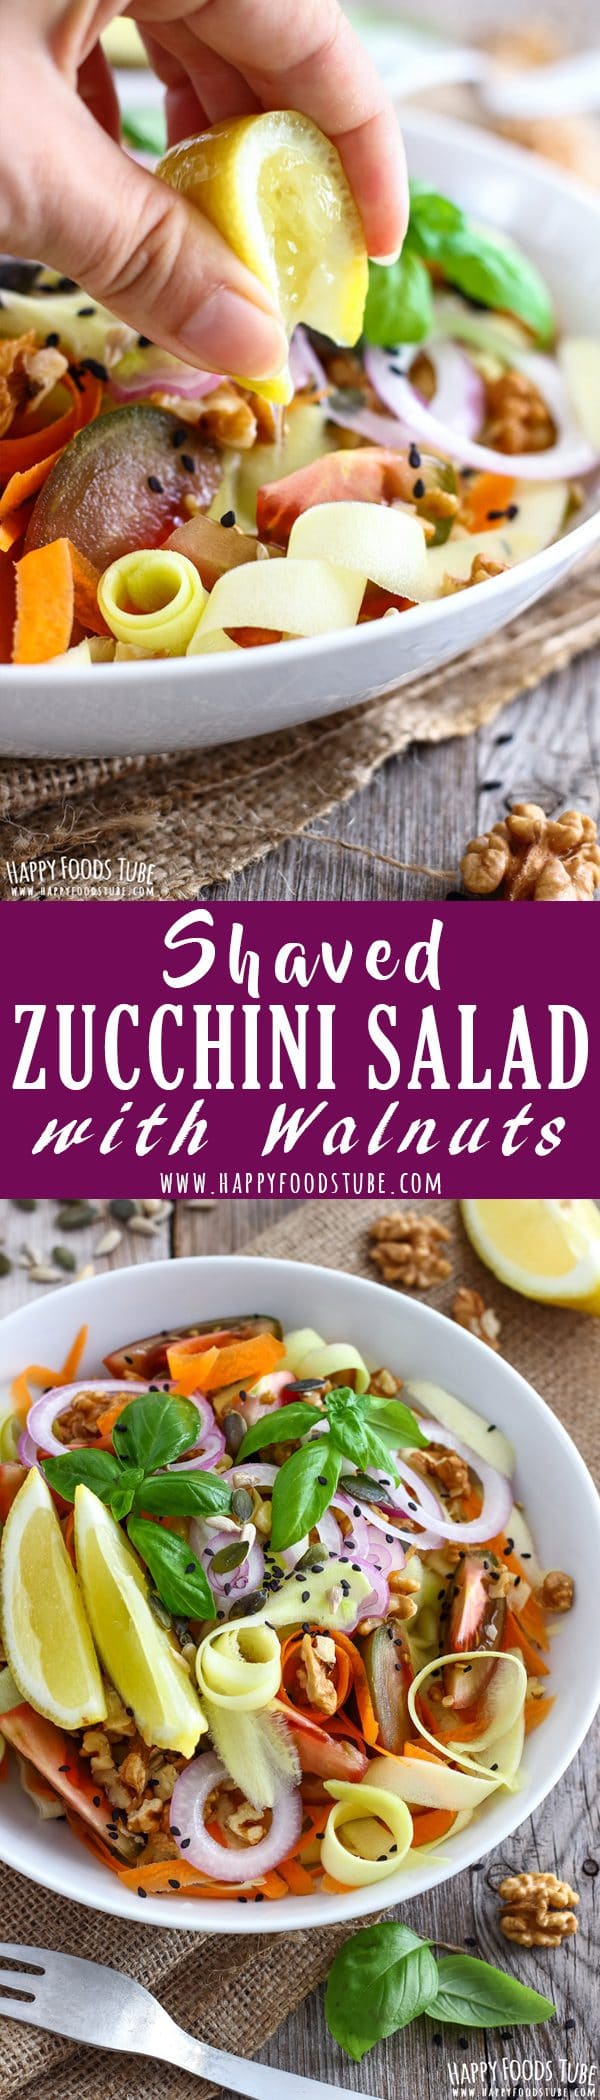 Shaved Zucchini Salad with Walnuts Recipe Collage